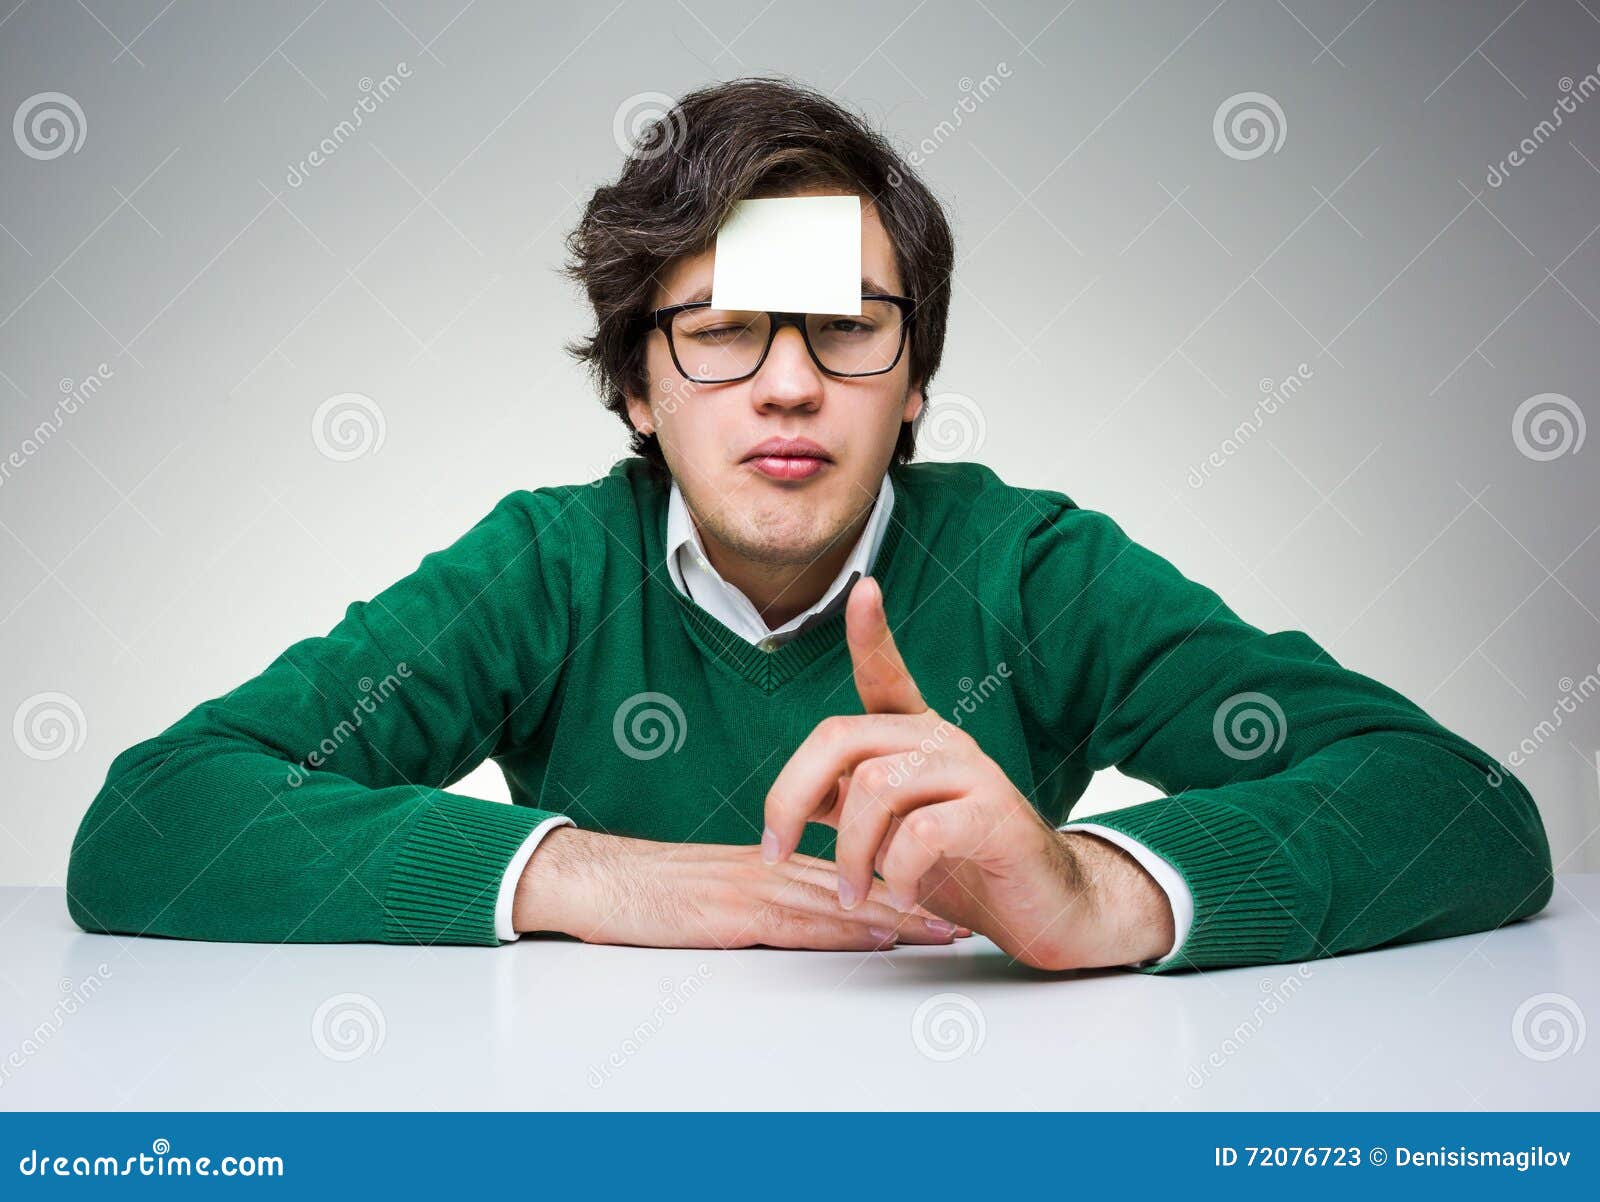 Blond Boy Waiting Flick Finger Forehead Stock Photo 718506784